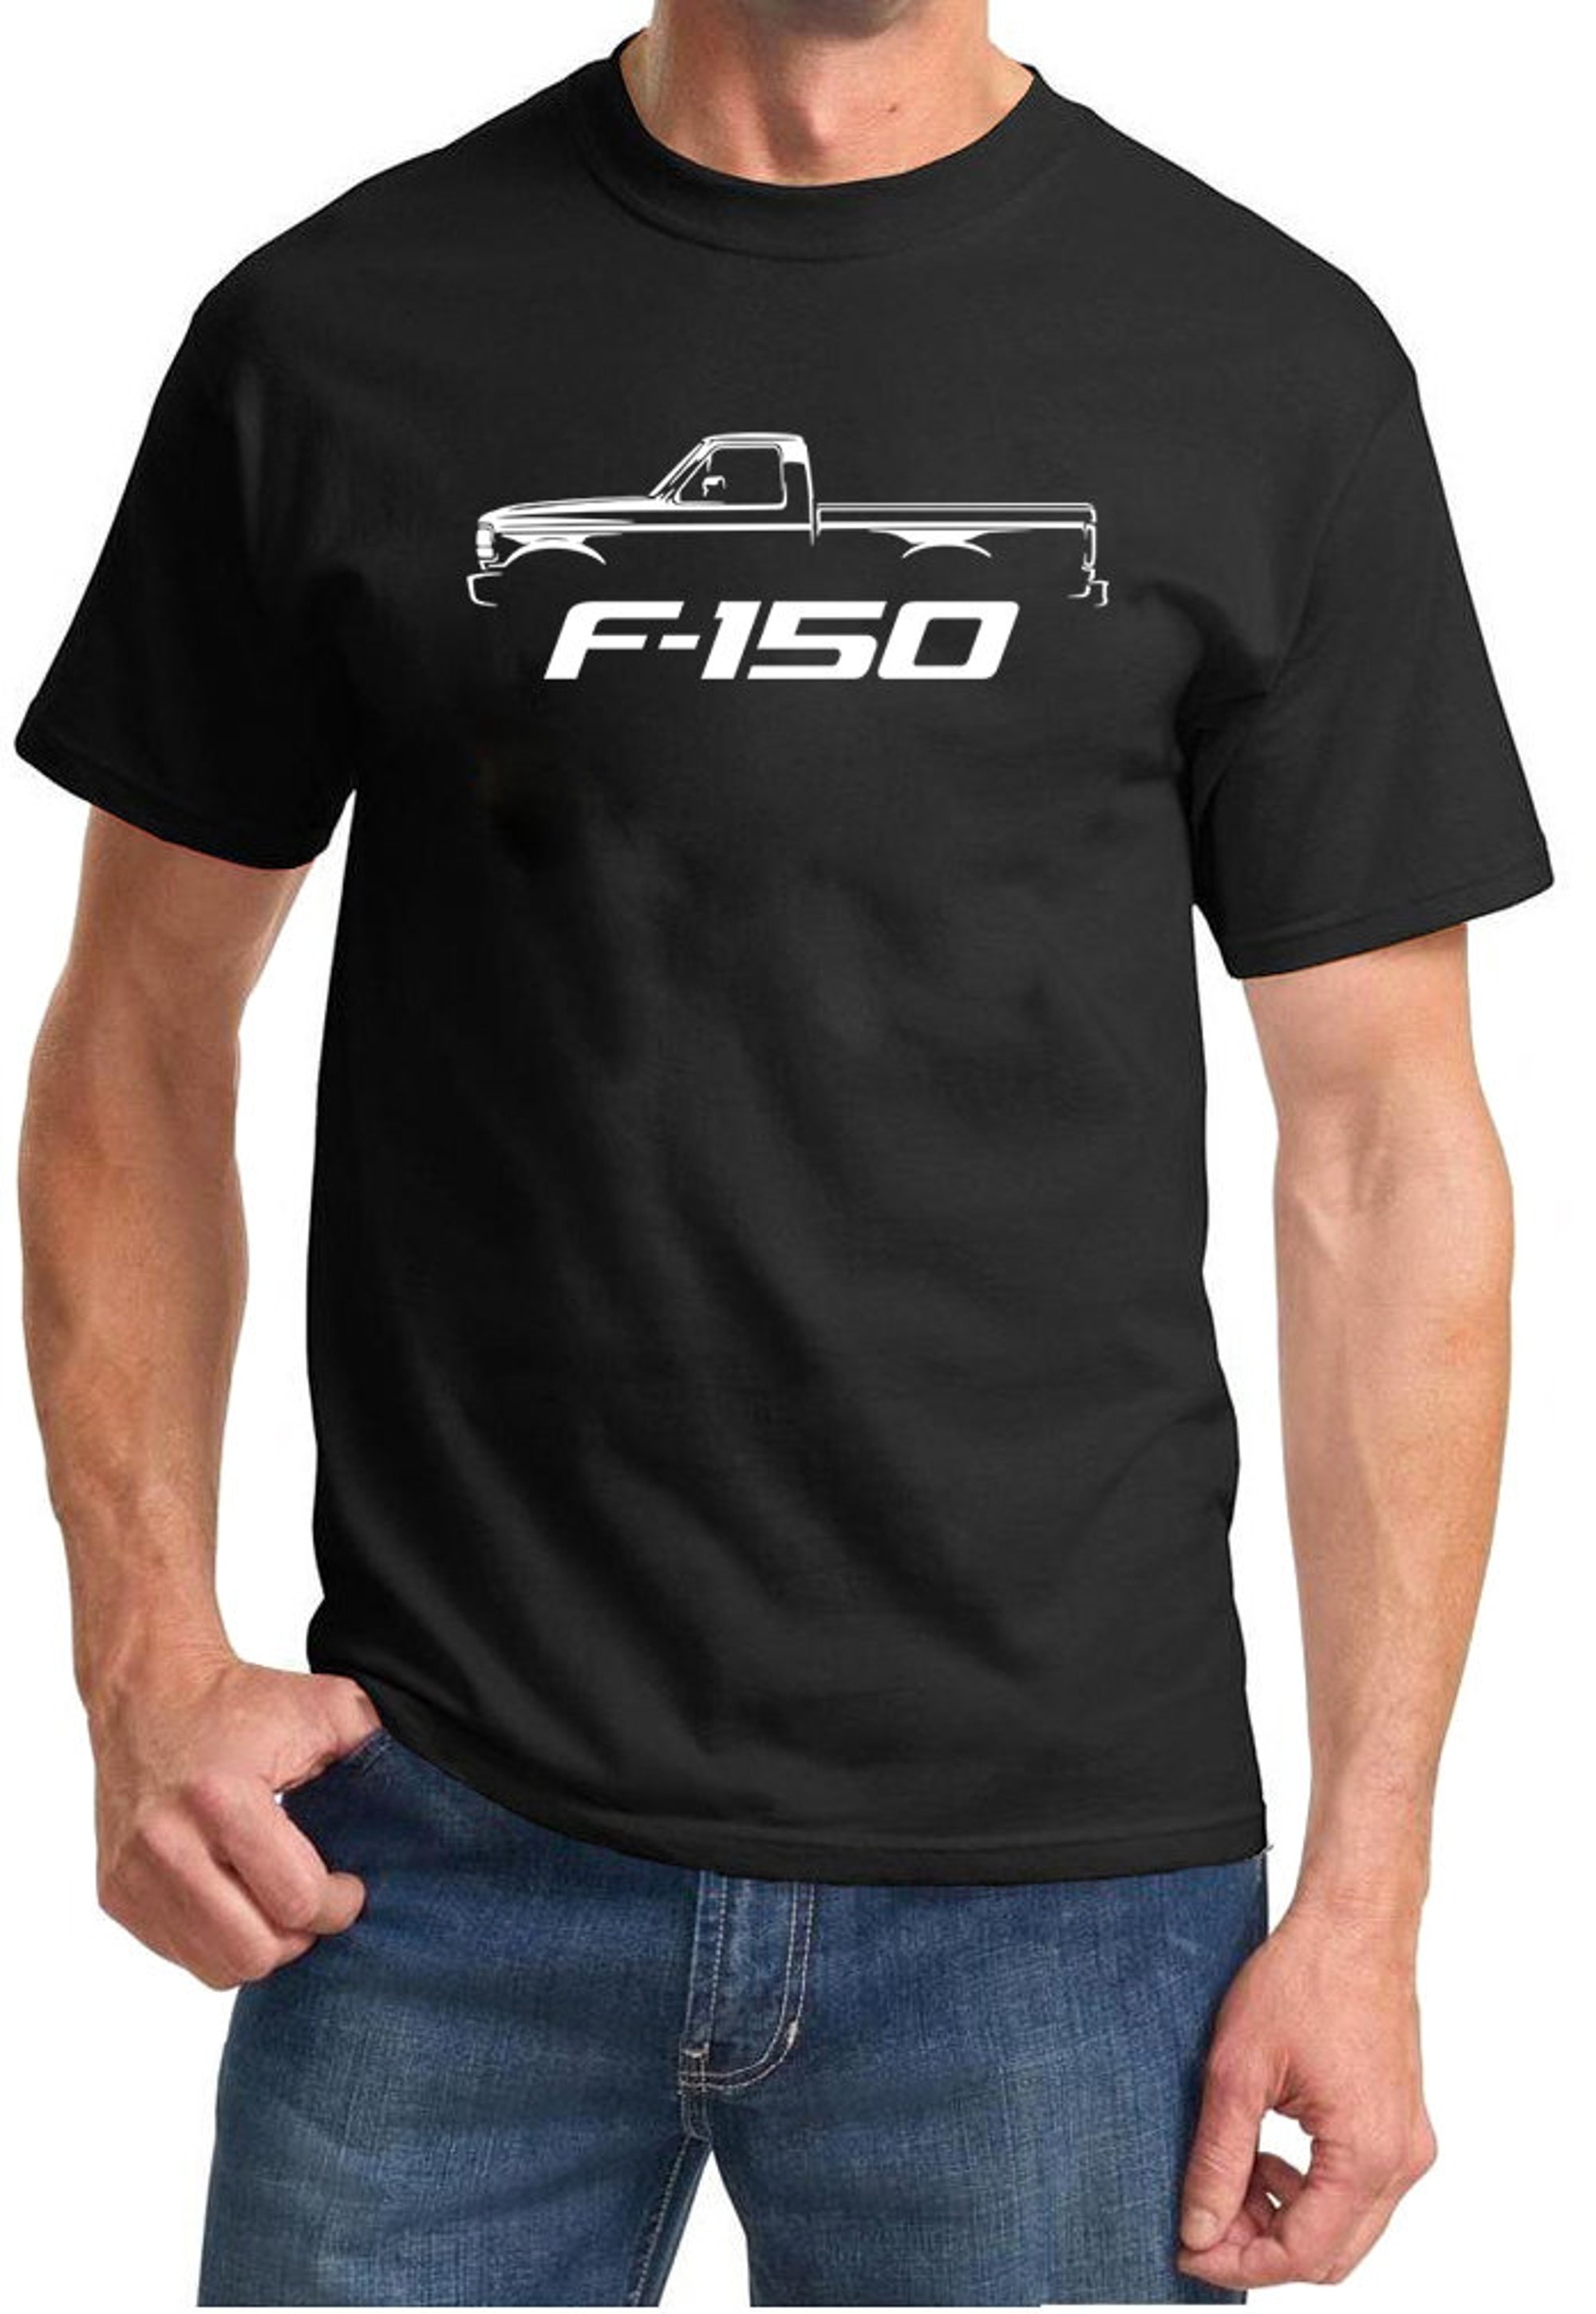 Discover 1992-96 Ford F150 Single Cab Pickup Truck T-Shirt